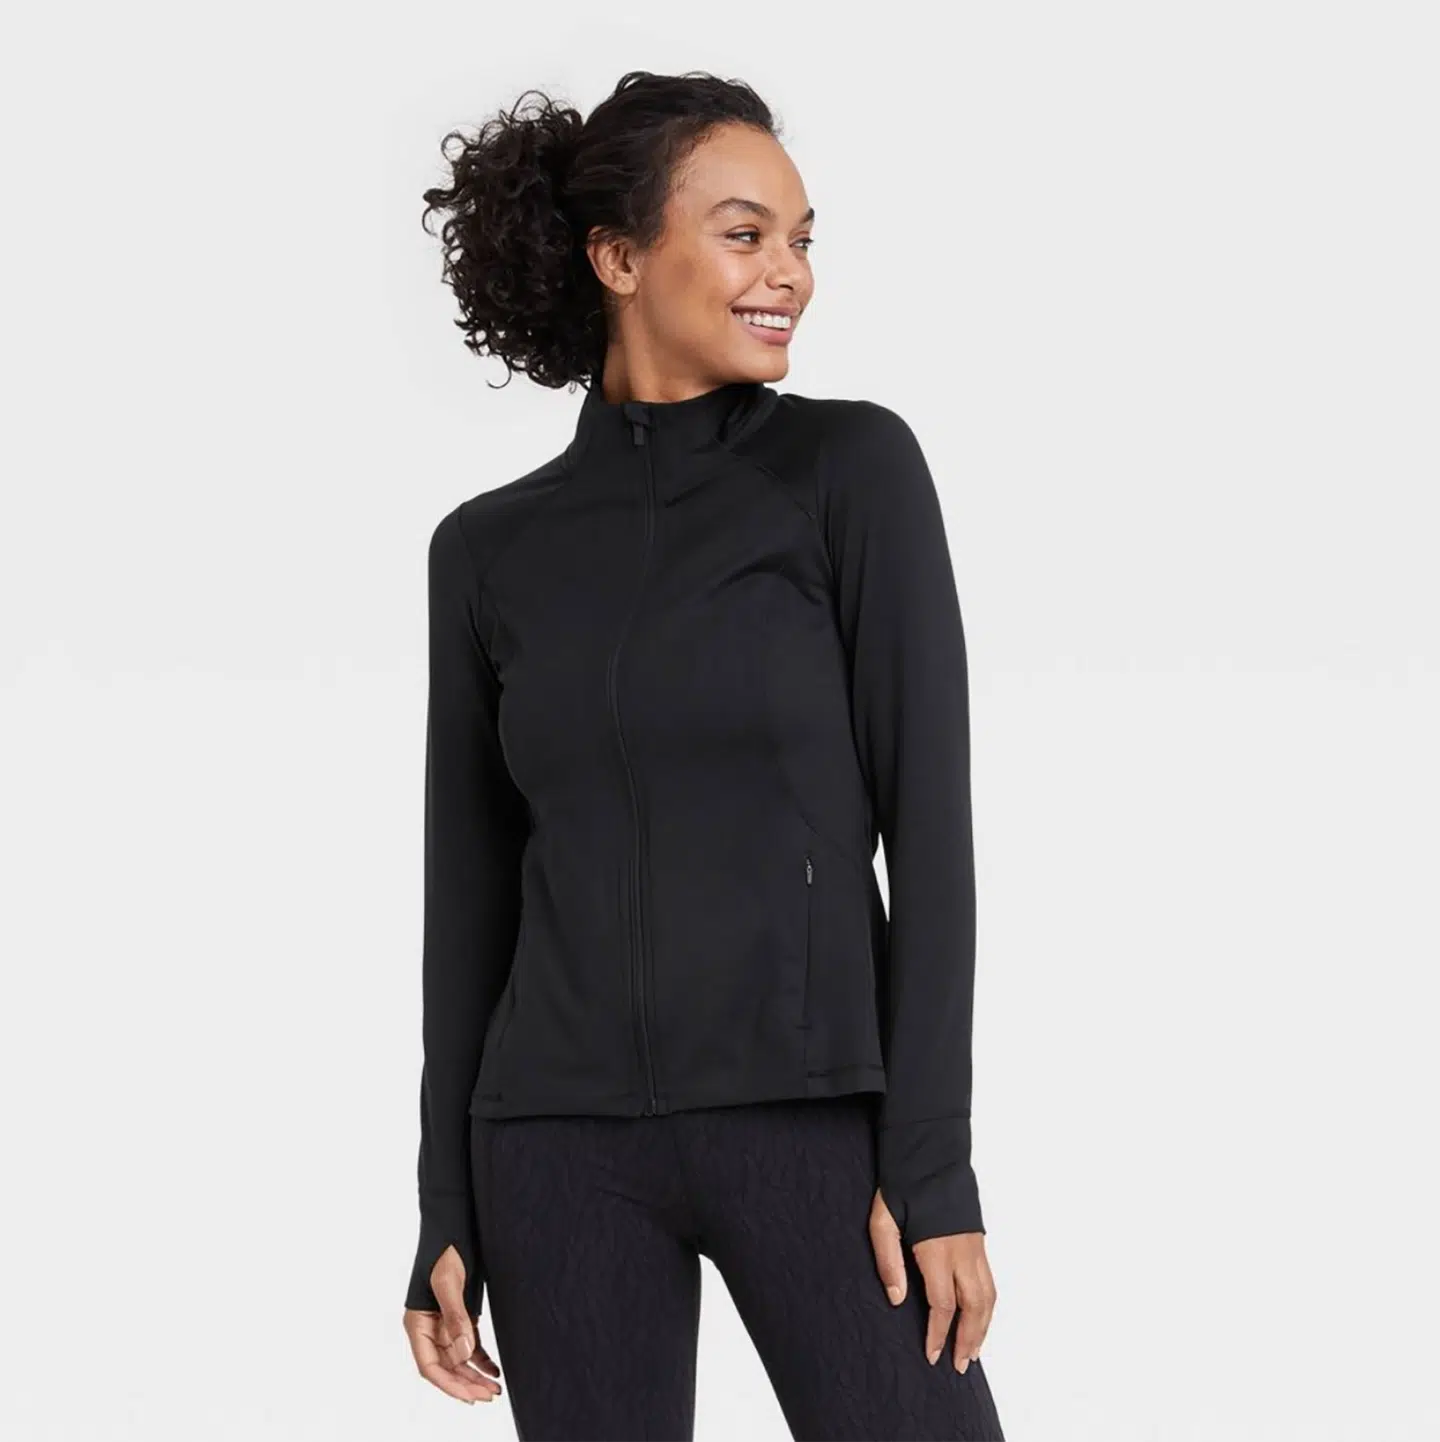 This Fleece Zip-Up Sweatshirt Is A Lululemon Dupe & Only $55 At Old Navy -  Narcity